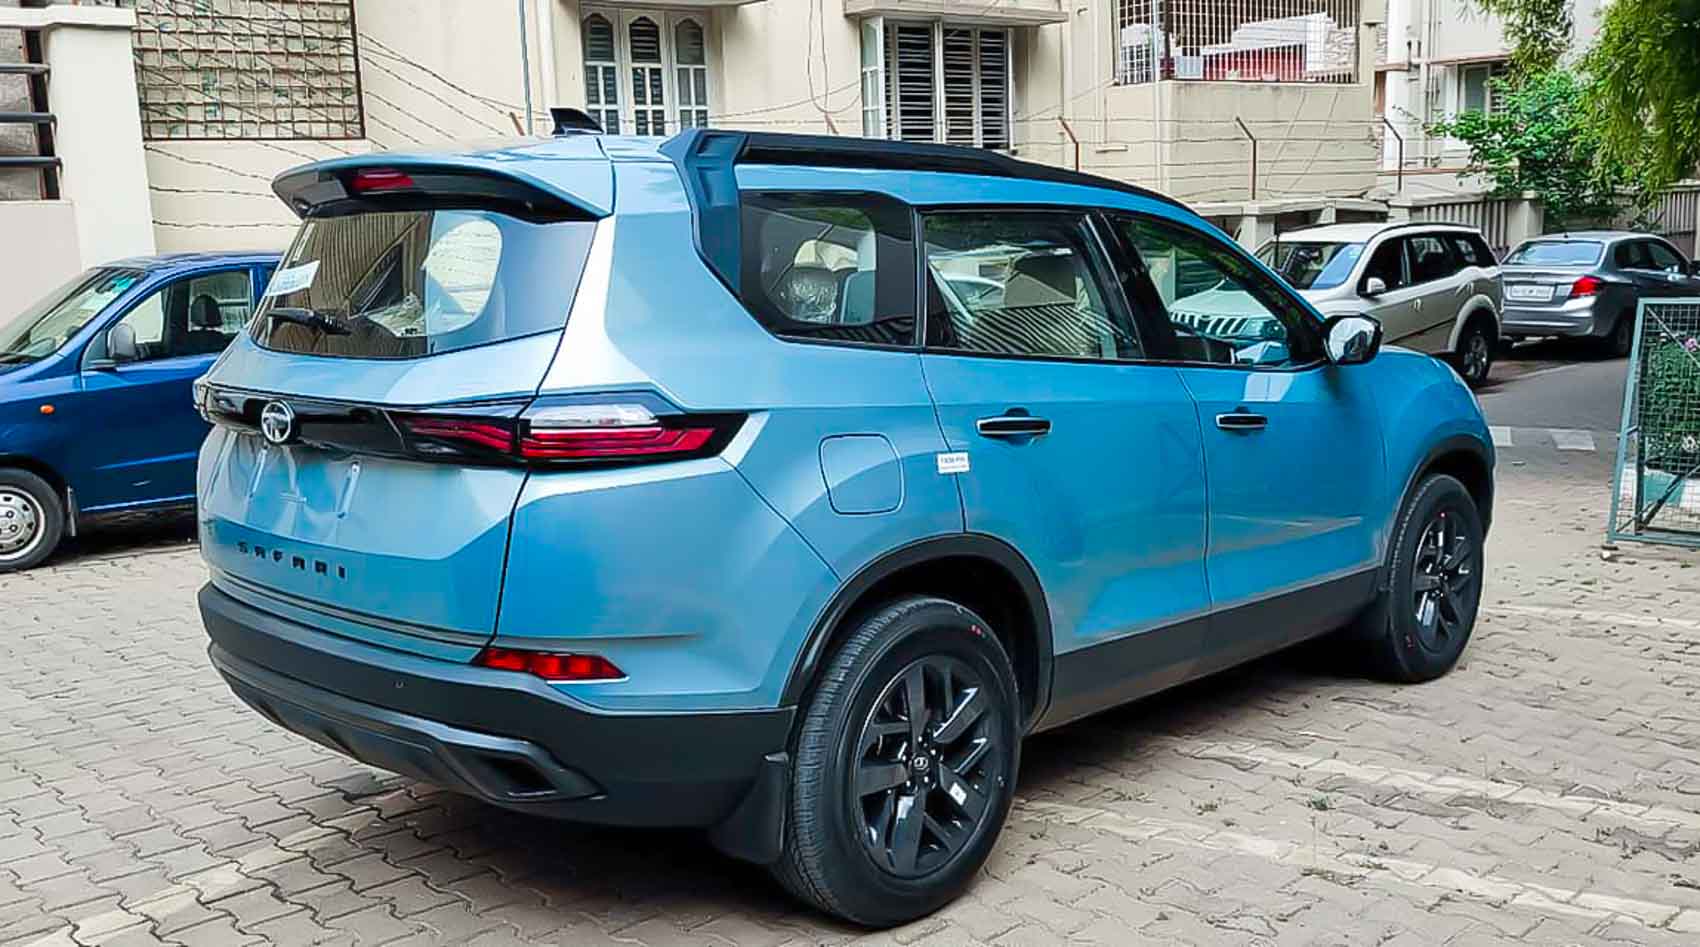 Top 5 Cars In India In Price Bracket of Rs. 18-22 Lakh [July 2021]